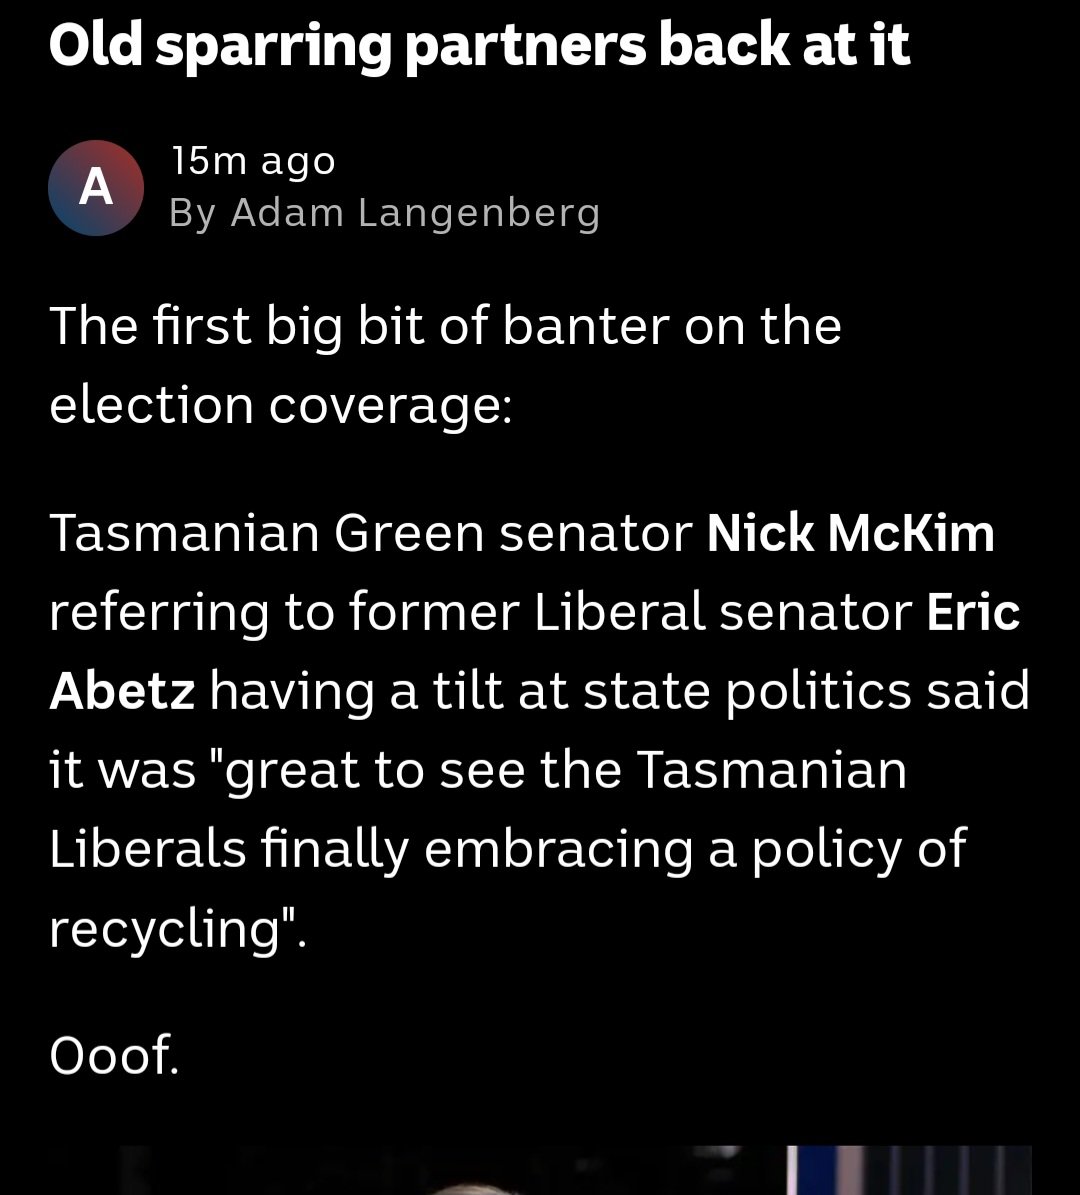 Classic commentary from a politician. You might not need to be in #Tasmania to appreciate it. #TasmaniaVotes